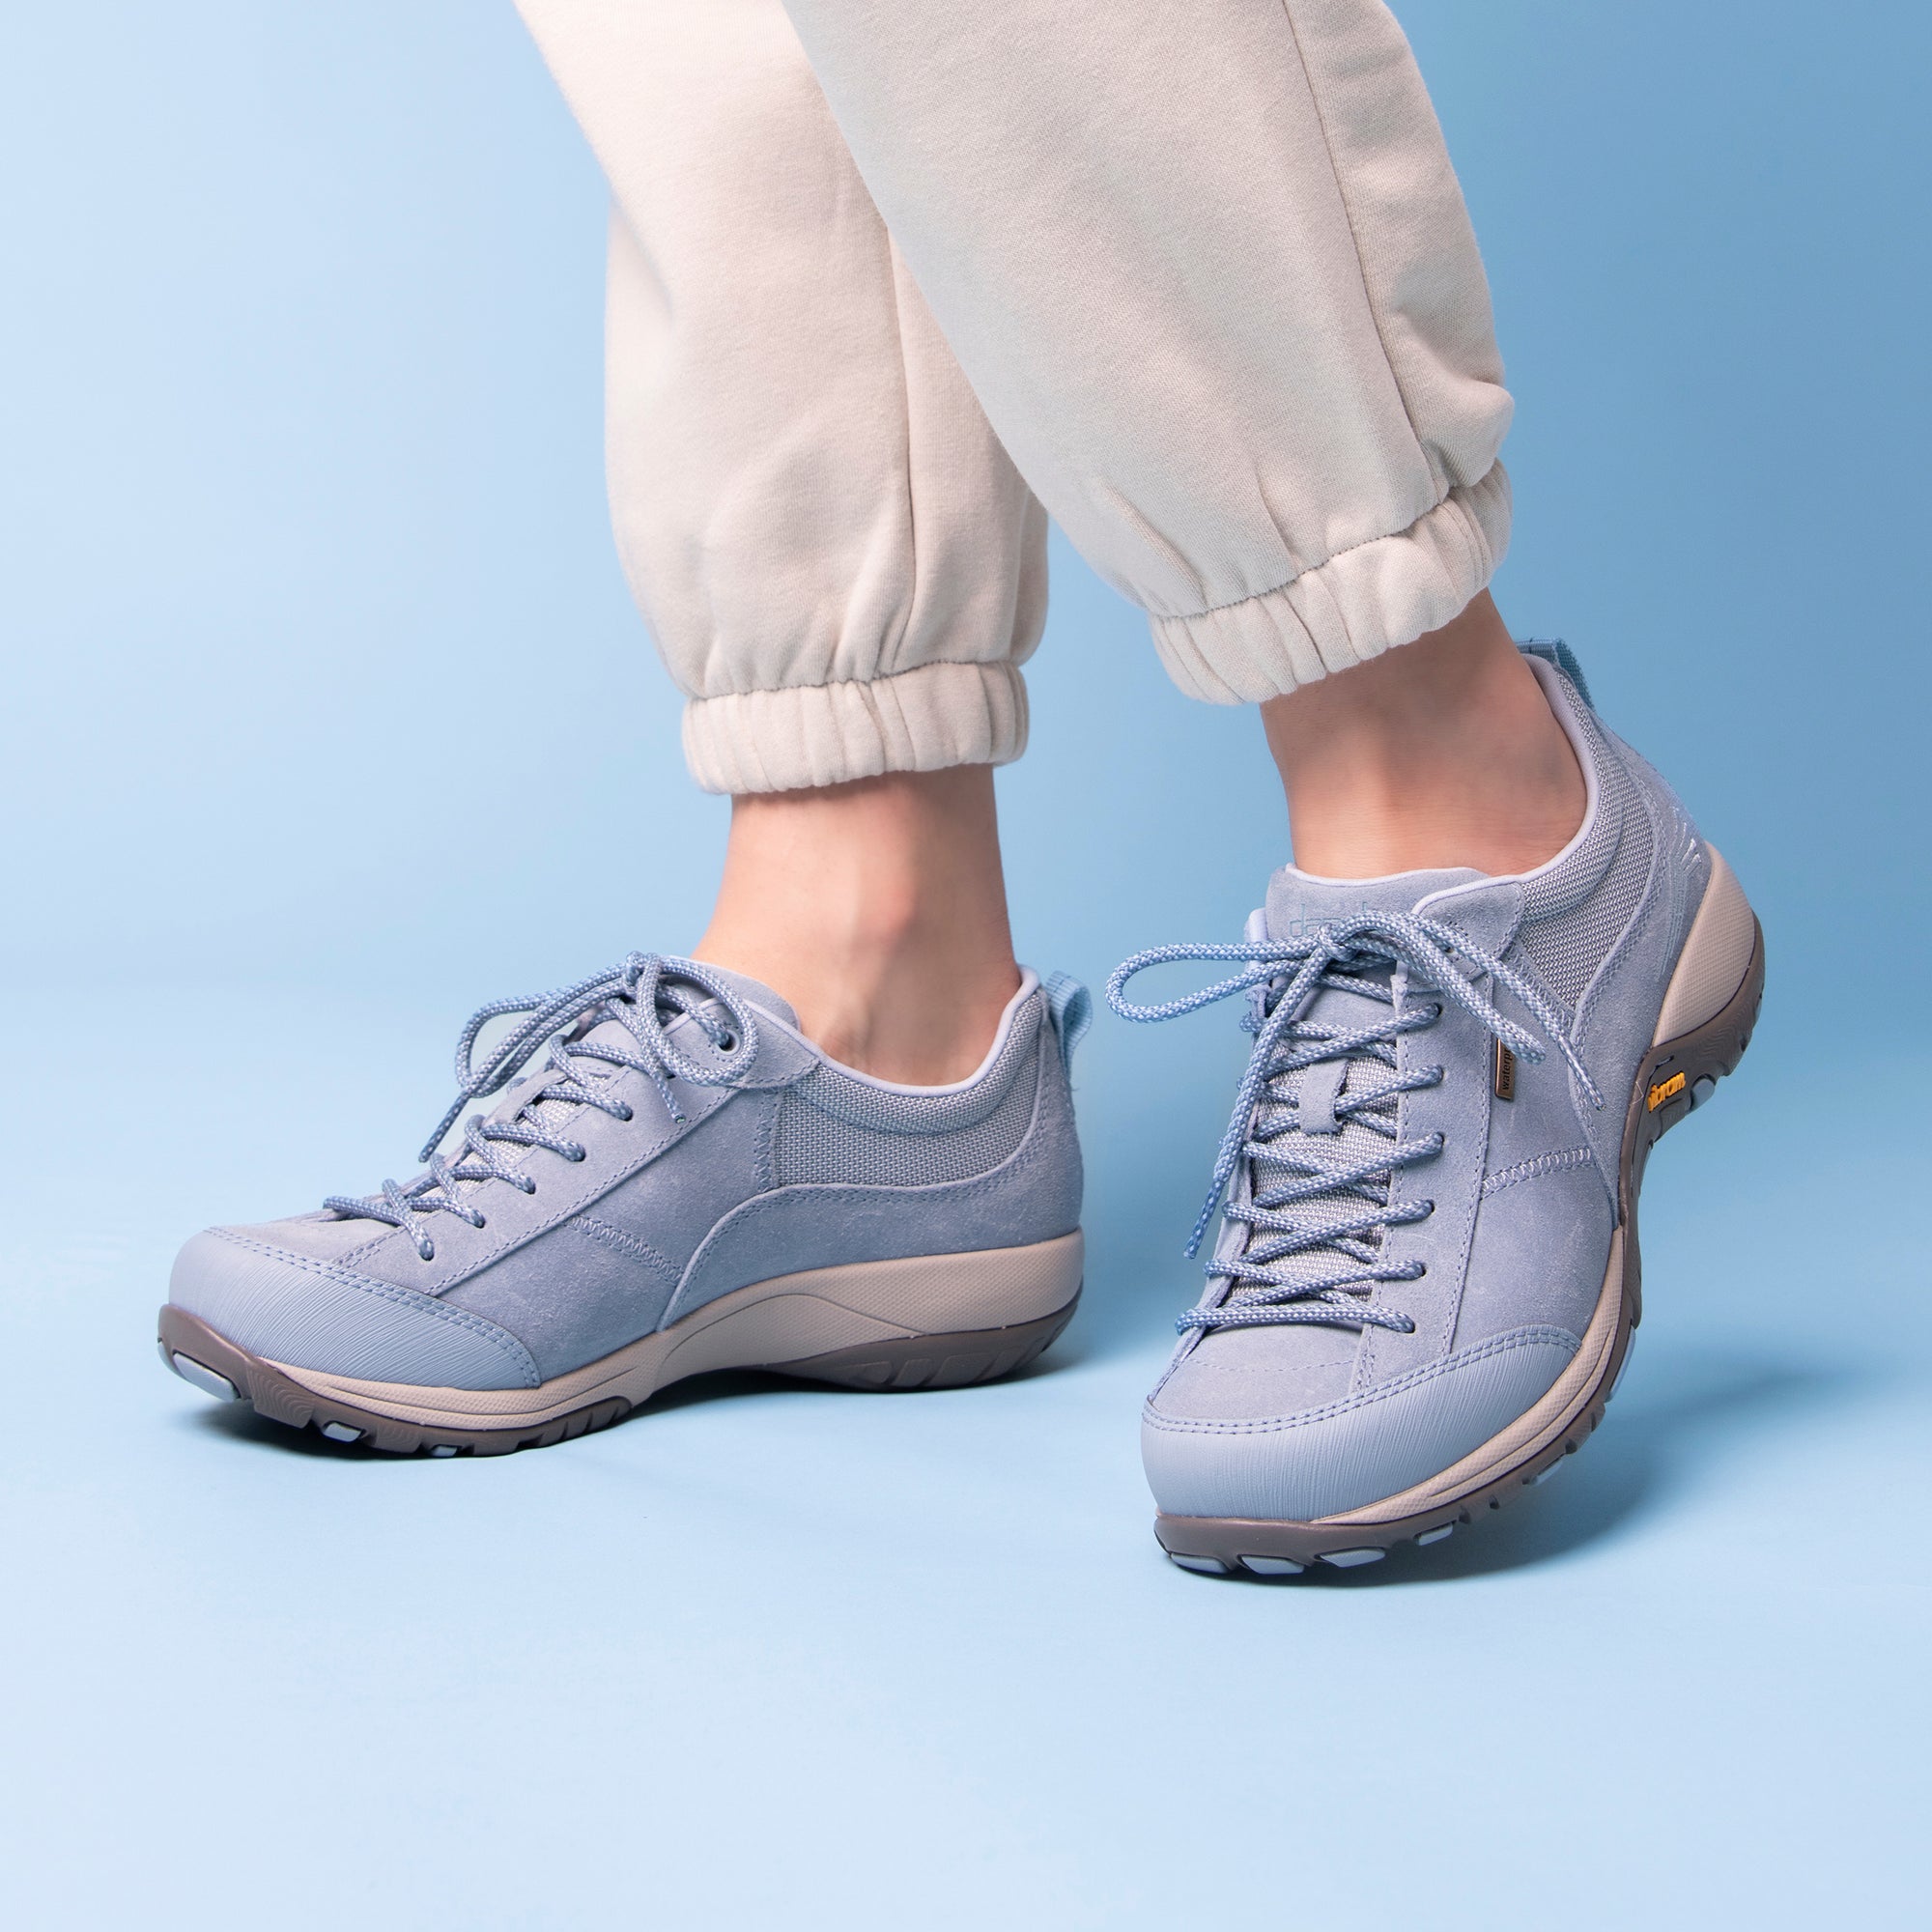 A supportive and durable outdoor shoe in a stylish light blue color.